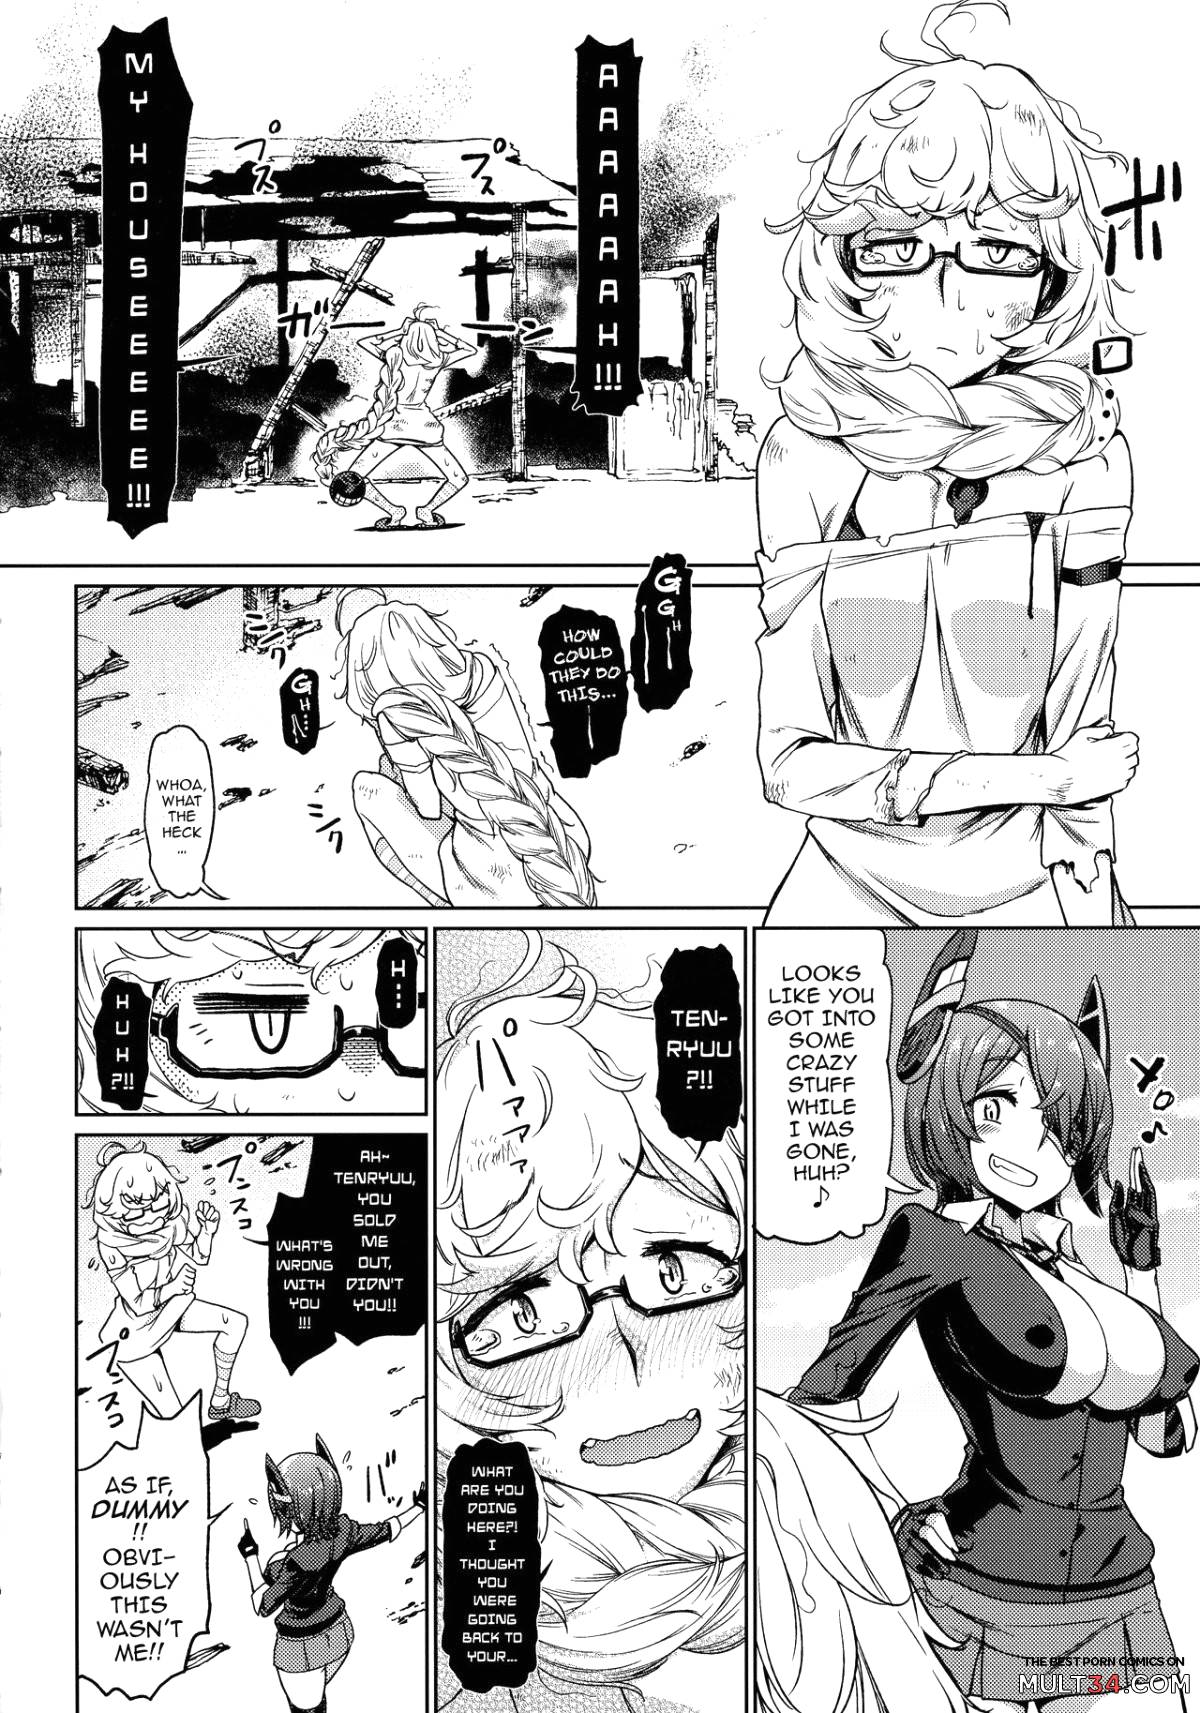 I Told You Supply Depot, This Tenryuu Belongs to You!! page 44